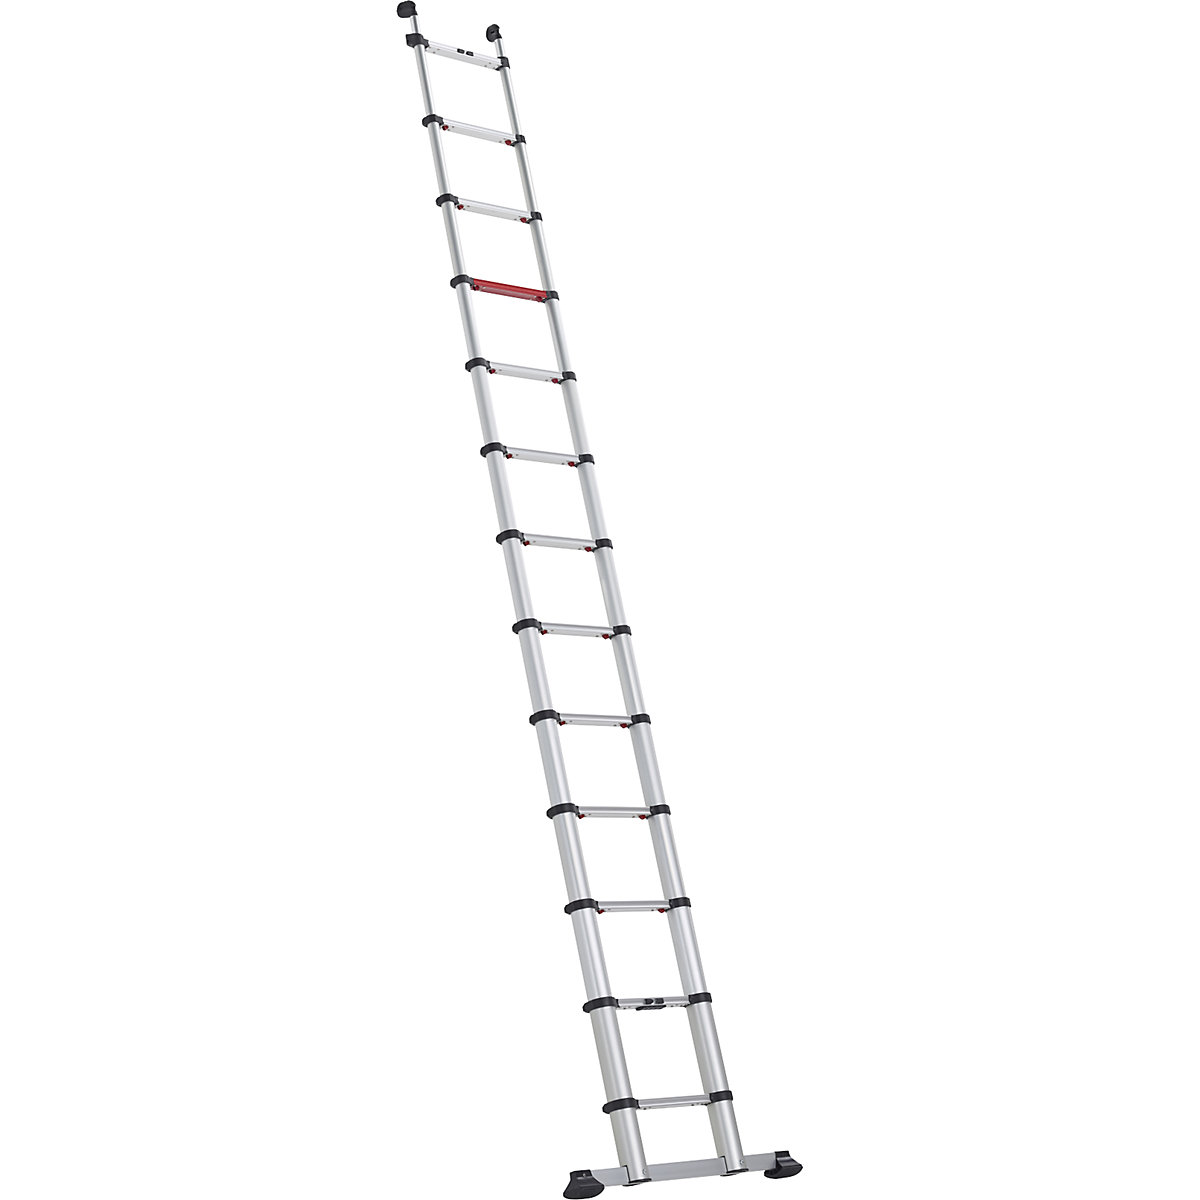 Telescopic lean-to ladder – Altrex, Smart Up Active, 13 rungs, length 4.0 m-9